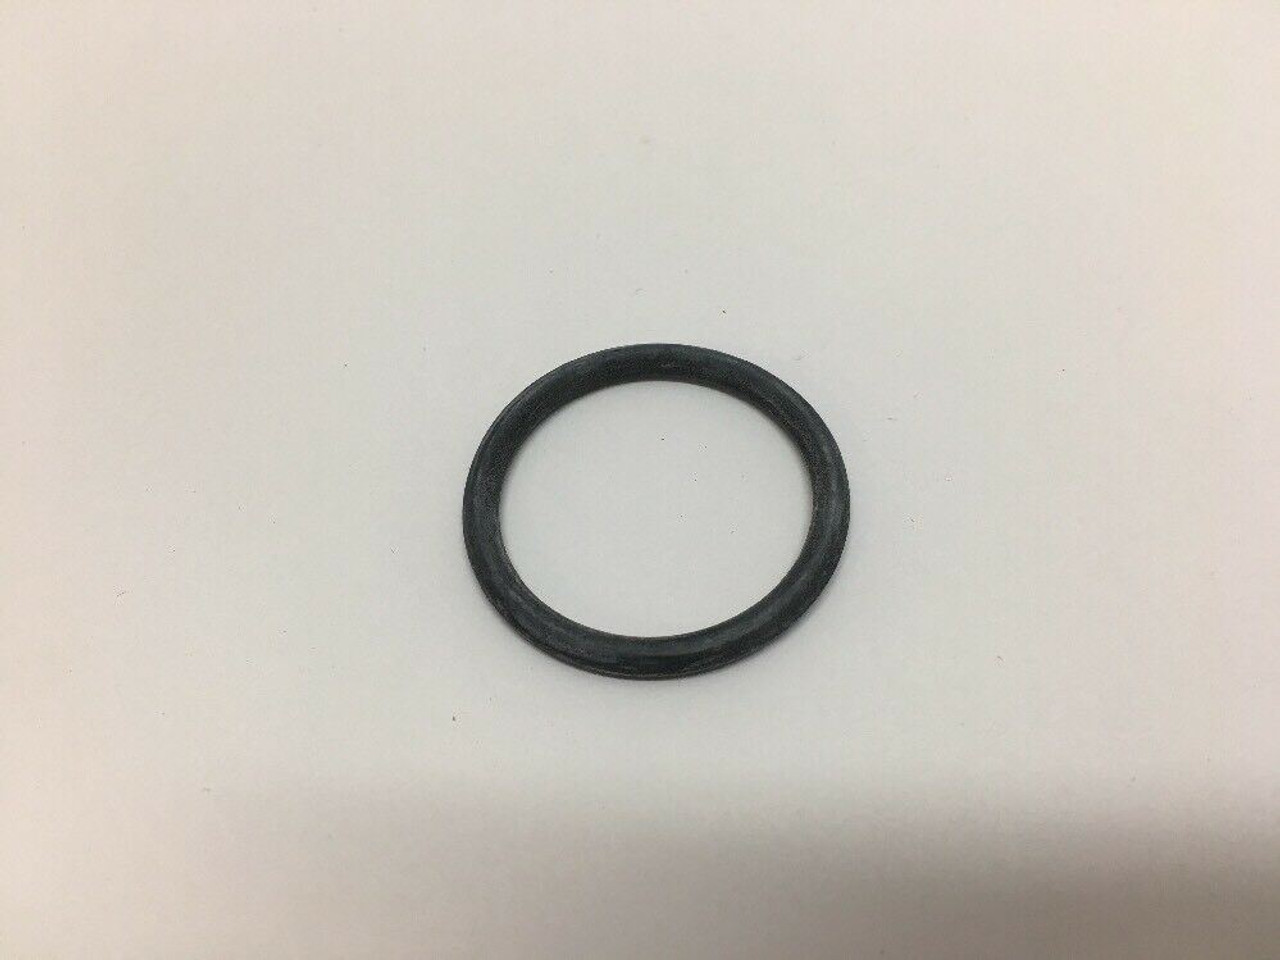 Hydro Carbon Fuel Resistant O-Ring MS29513-218 Seal Dynamics Lot of 5